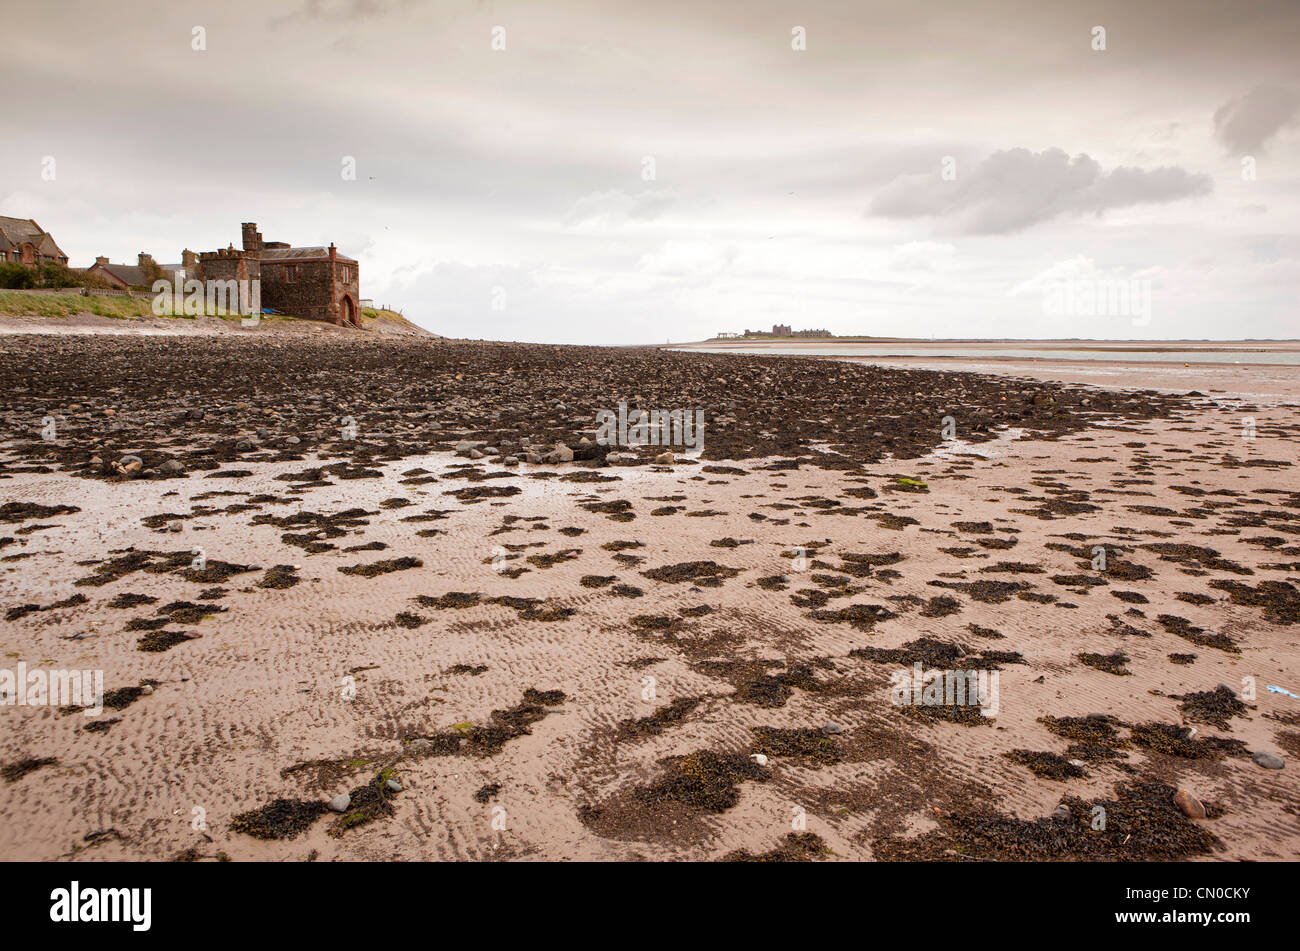 UK, Cumbria, Barrow in Furness, Roa Island, shore at low tide with Piel Island in distance Stock Photo